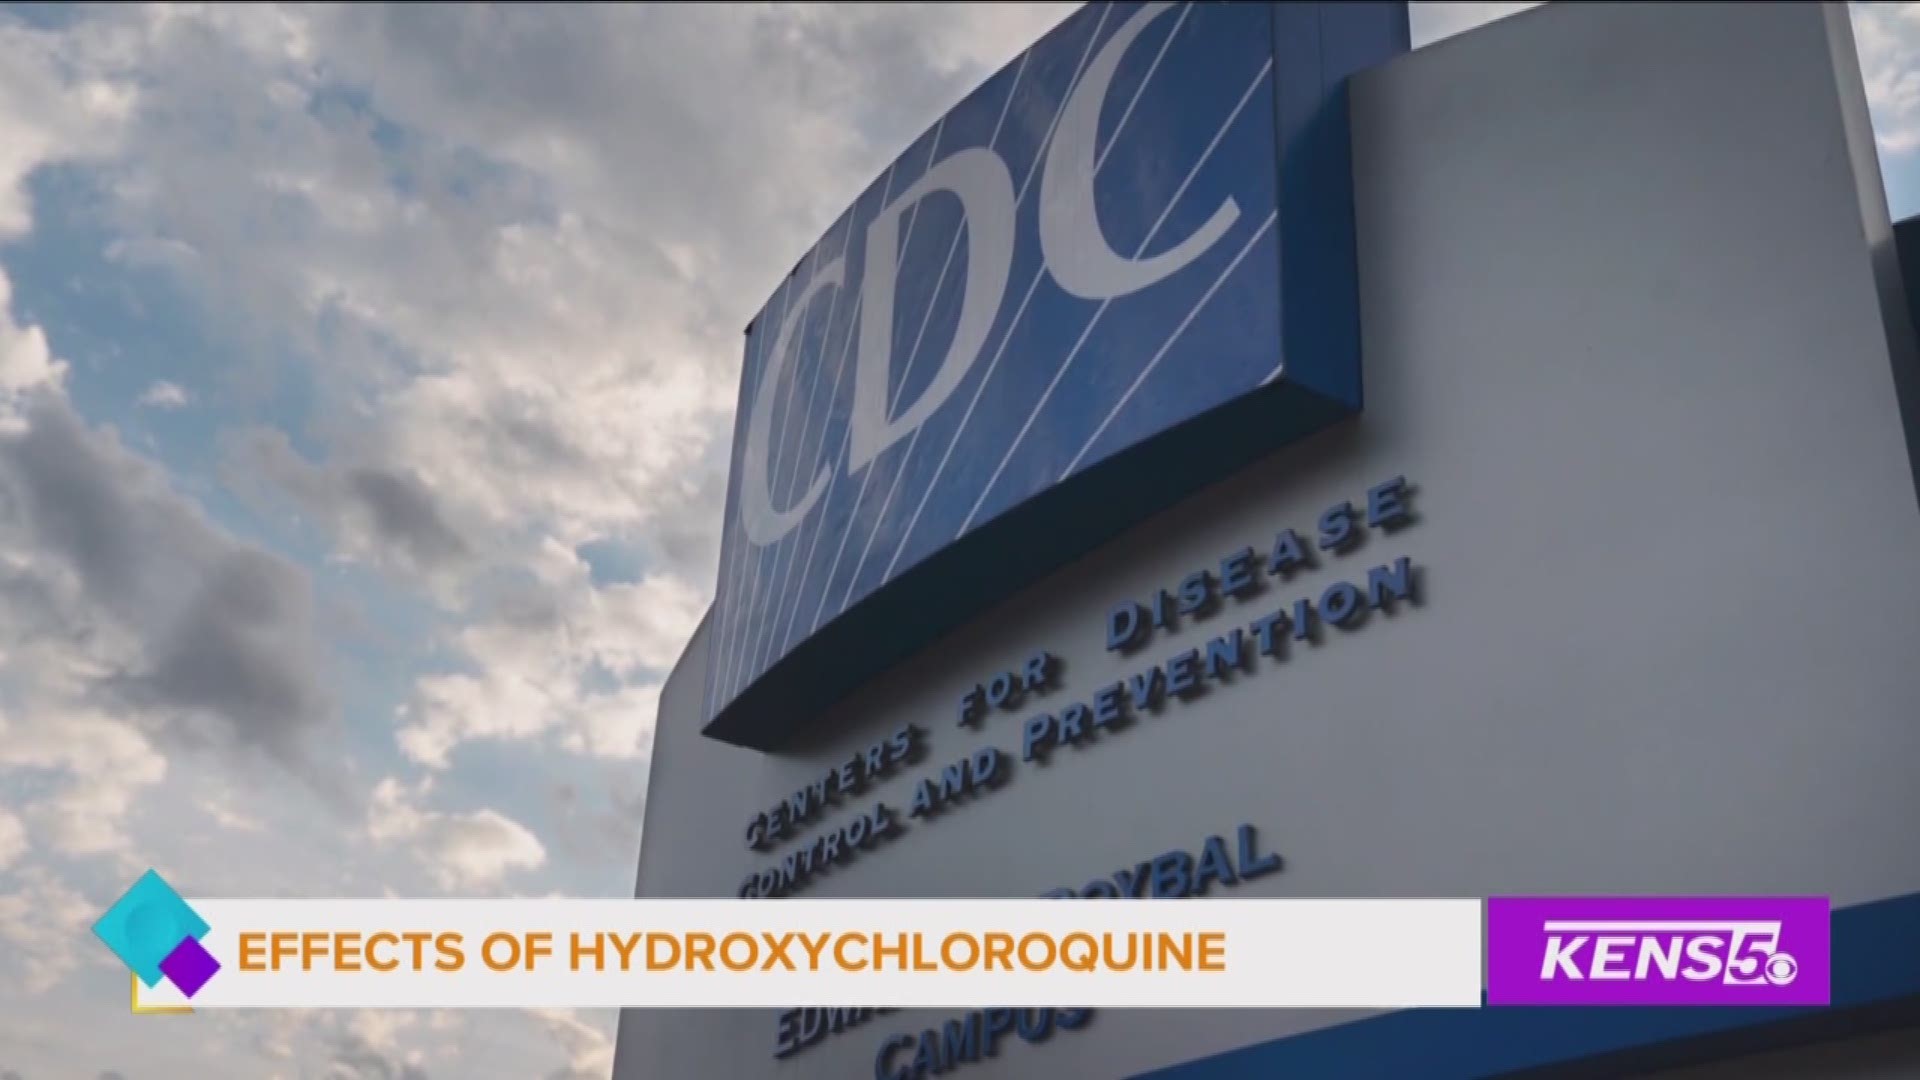 Behind the investigation of the effects of hydroxychloroquine